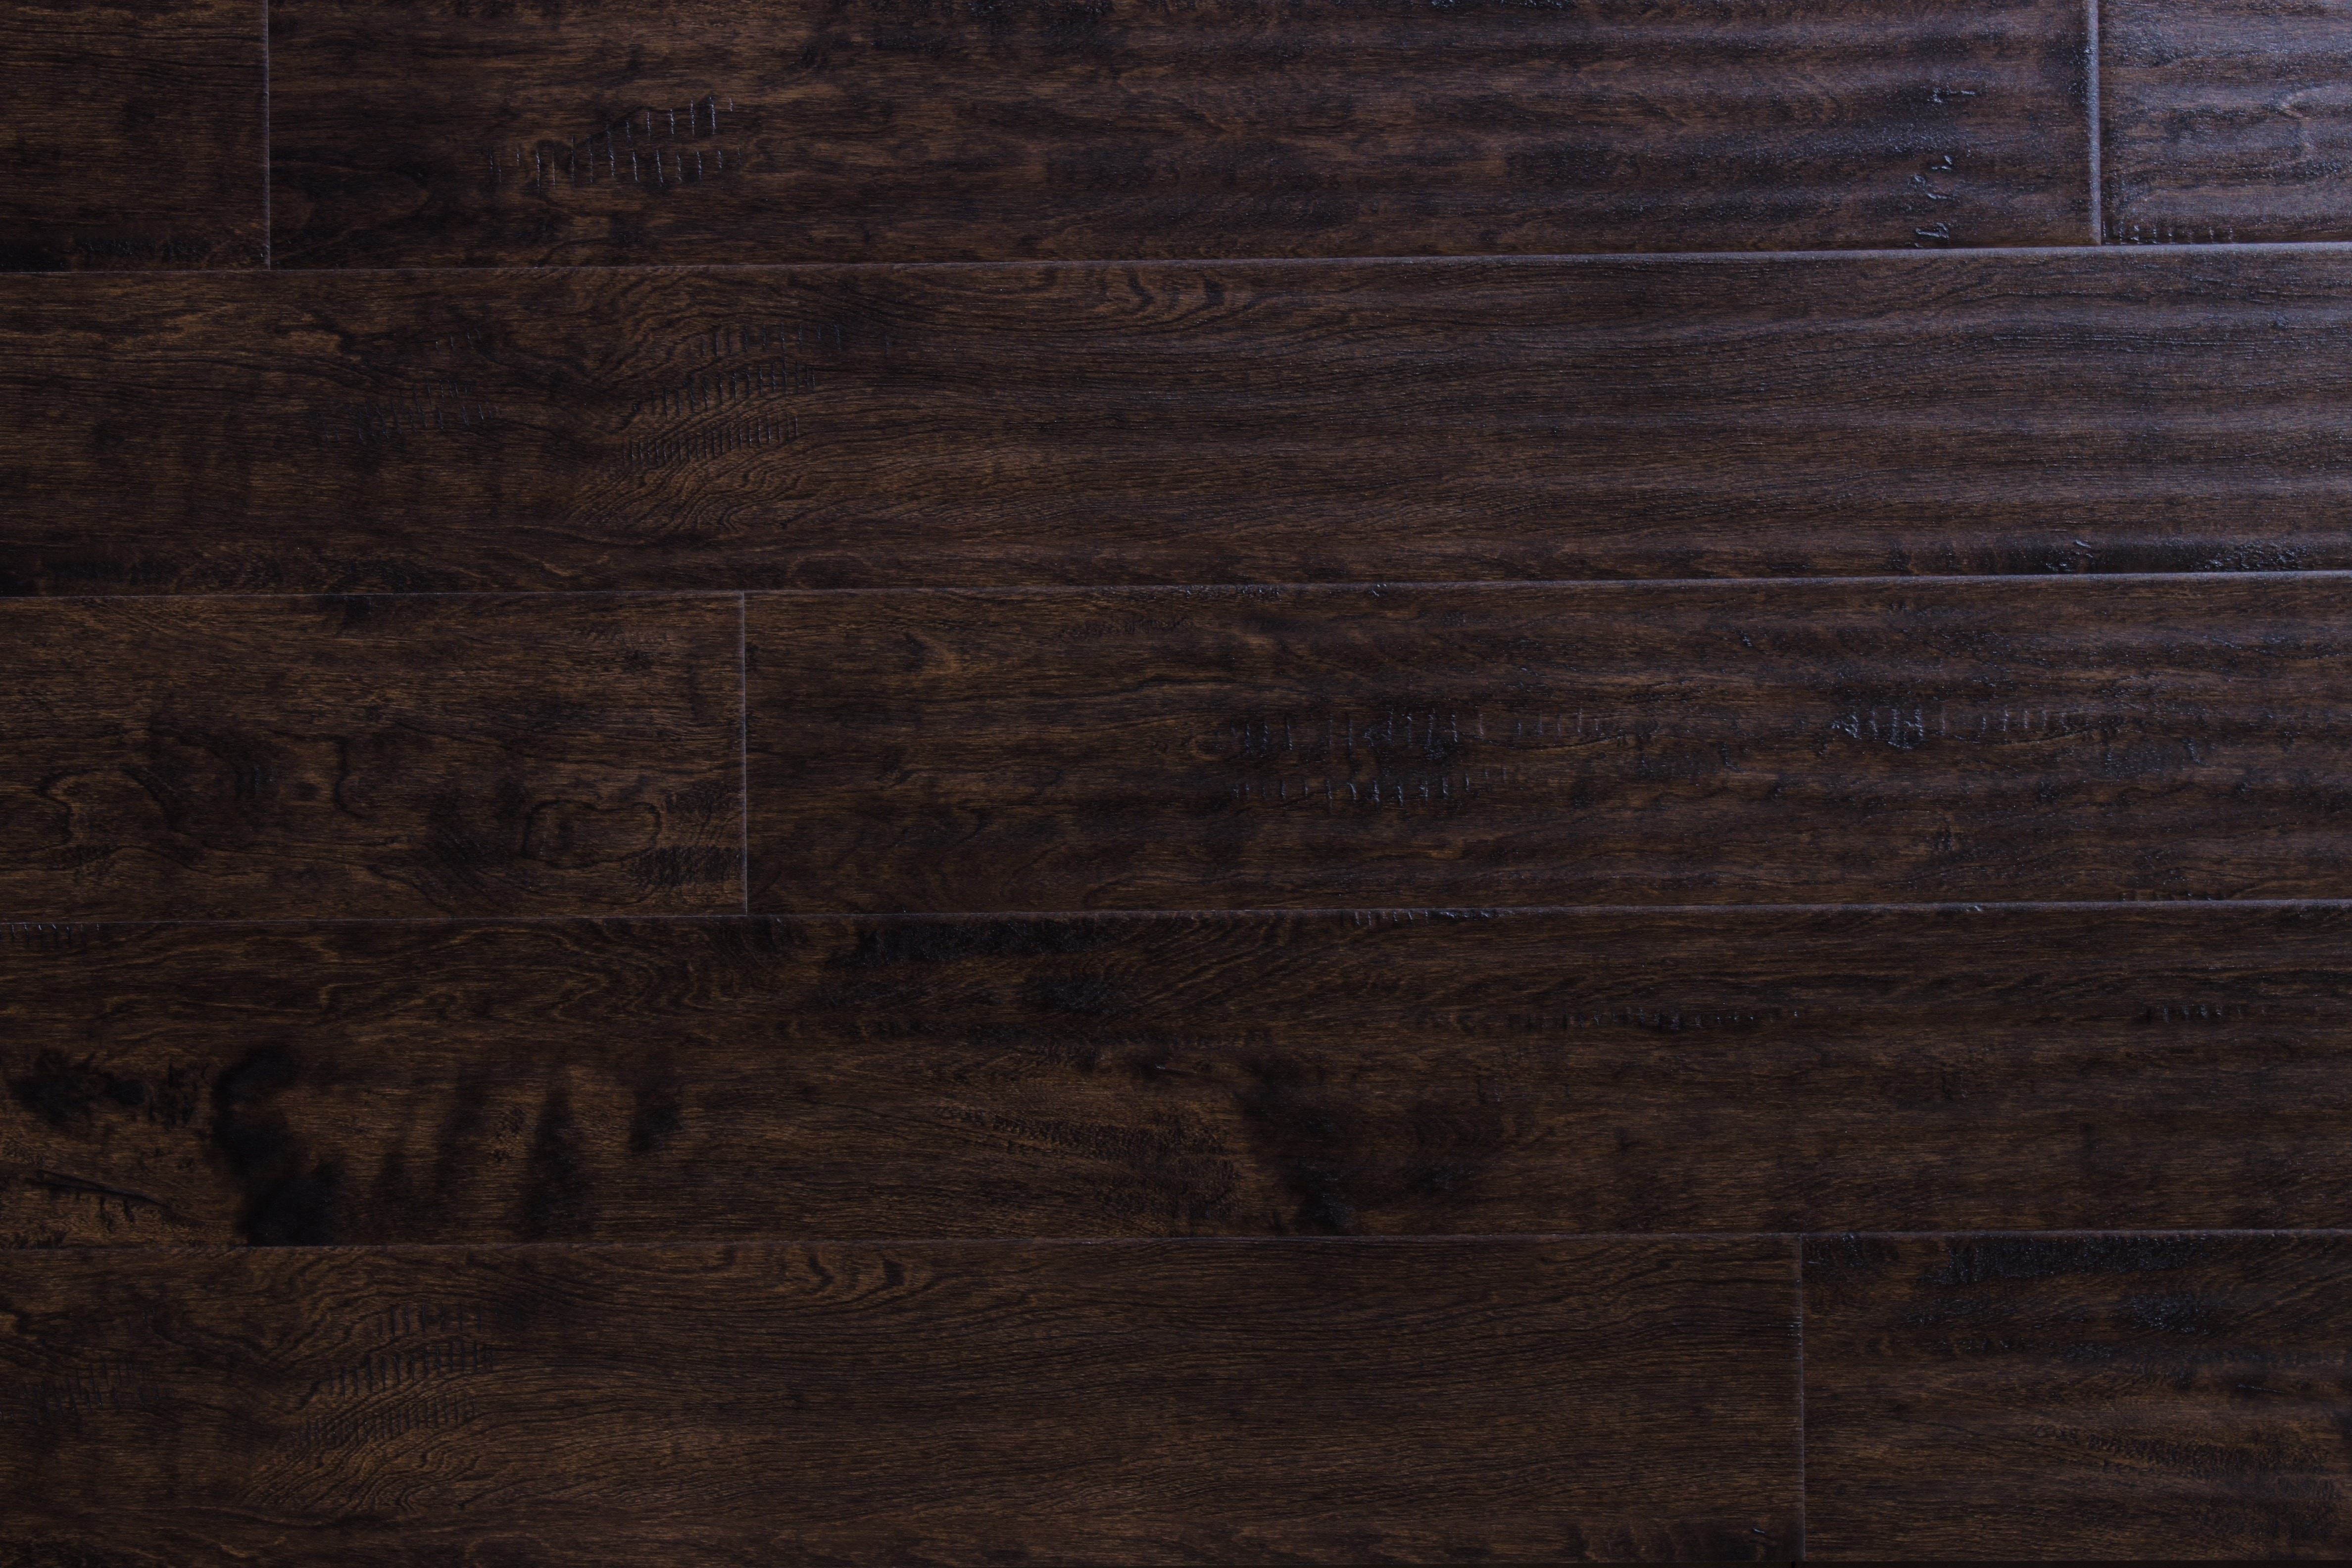 11 Unique Cost to Install and Finish Hardwood Floors 2024 free download cost to install and finish hardwood floors of wood flooring free samples available at builddirecta throughout tailor multi gb 5874277bb8d3c